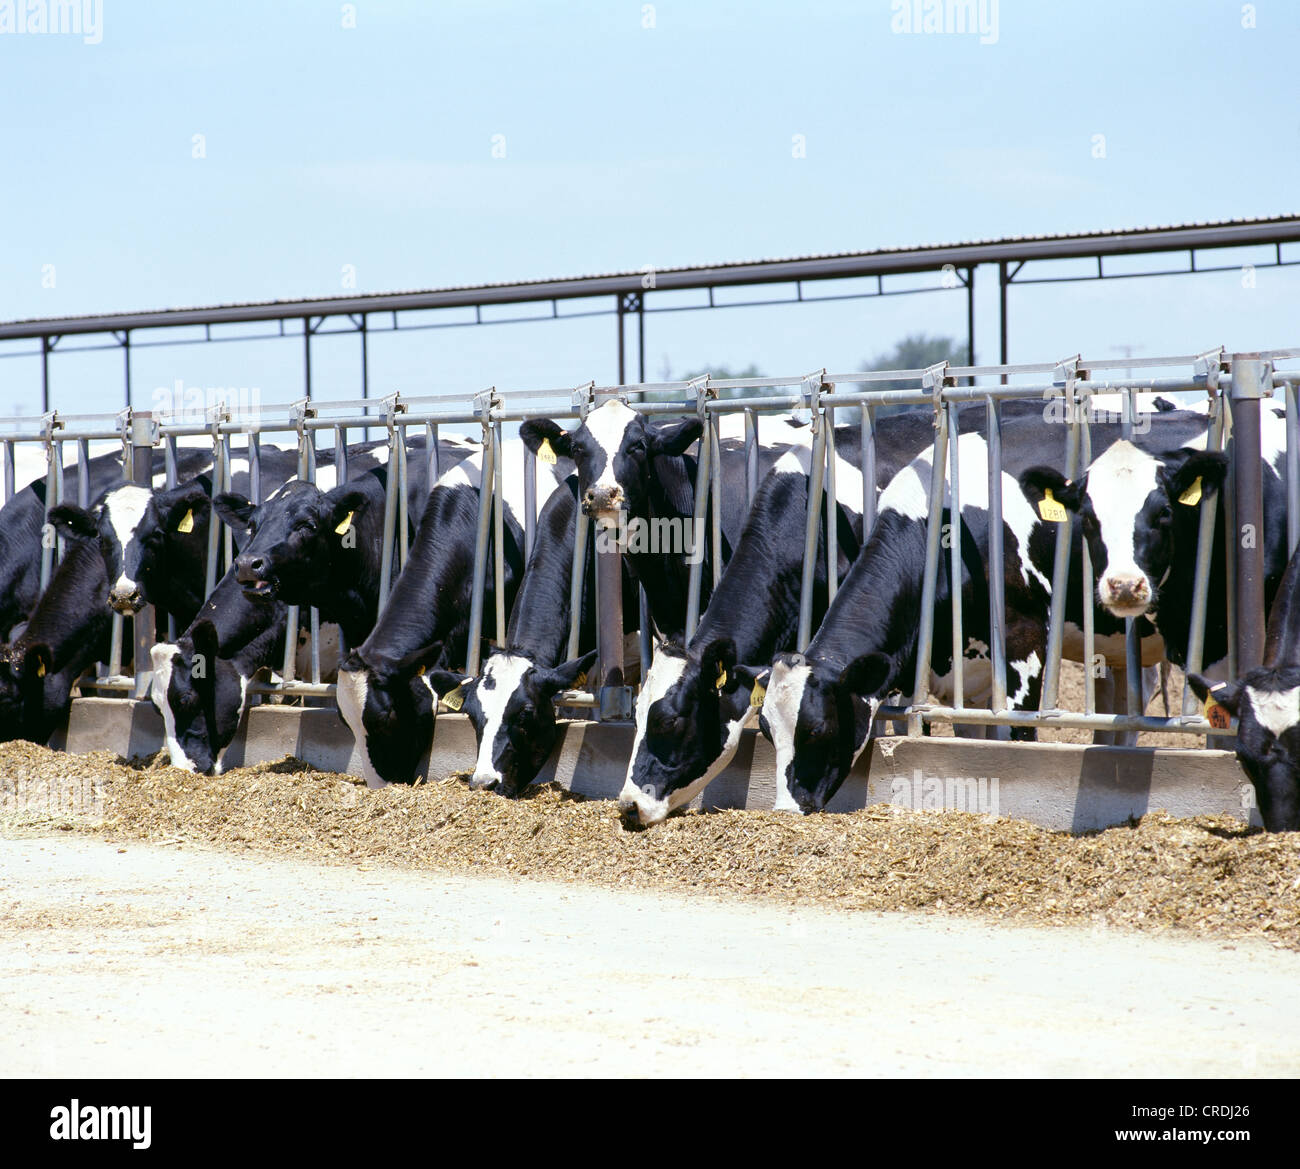 DAIRY COWS EATING CORN SILAGE / CALIFORNIA Stock Photo